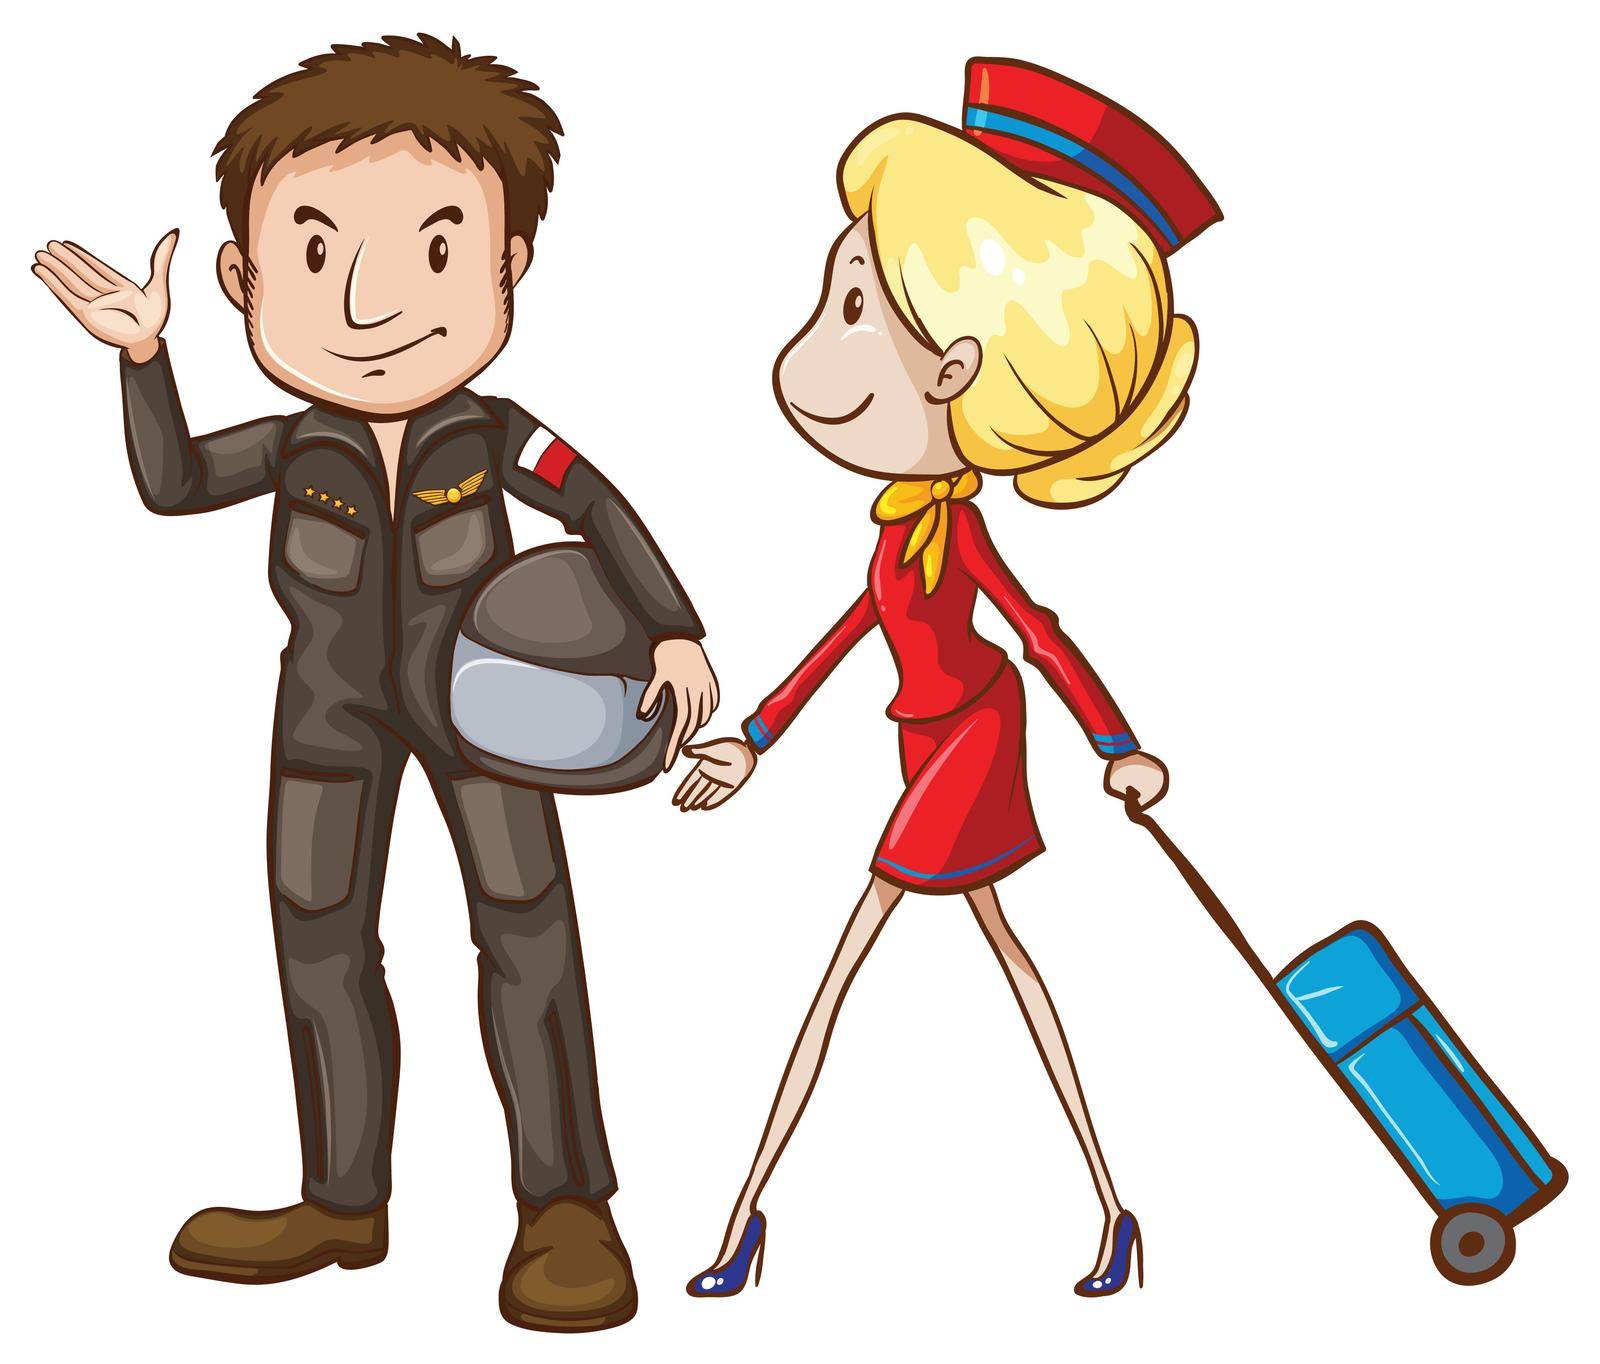 A simple sketch of a pilot and a stewardess by iimages